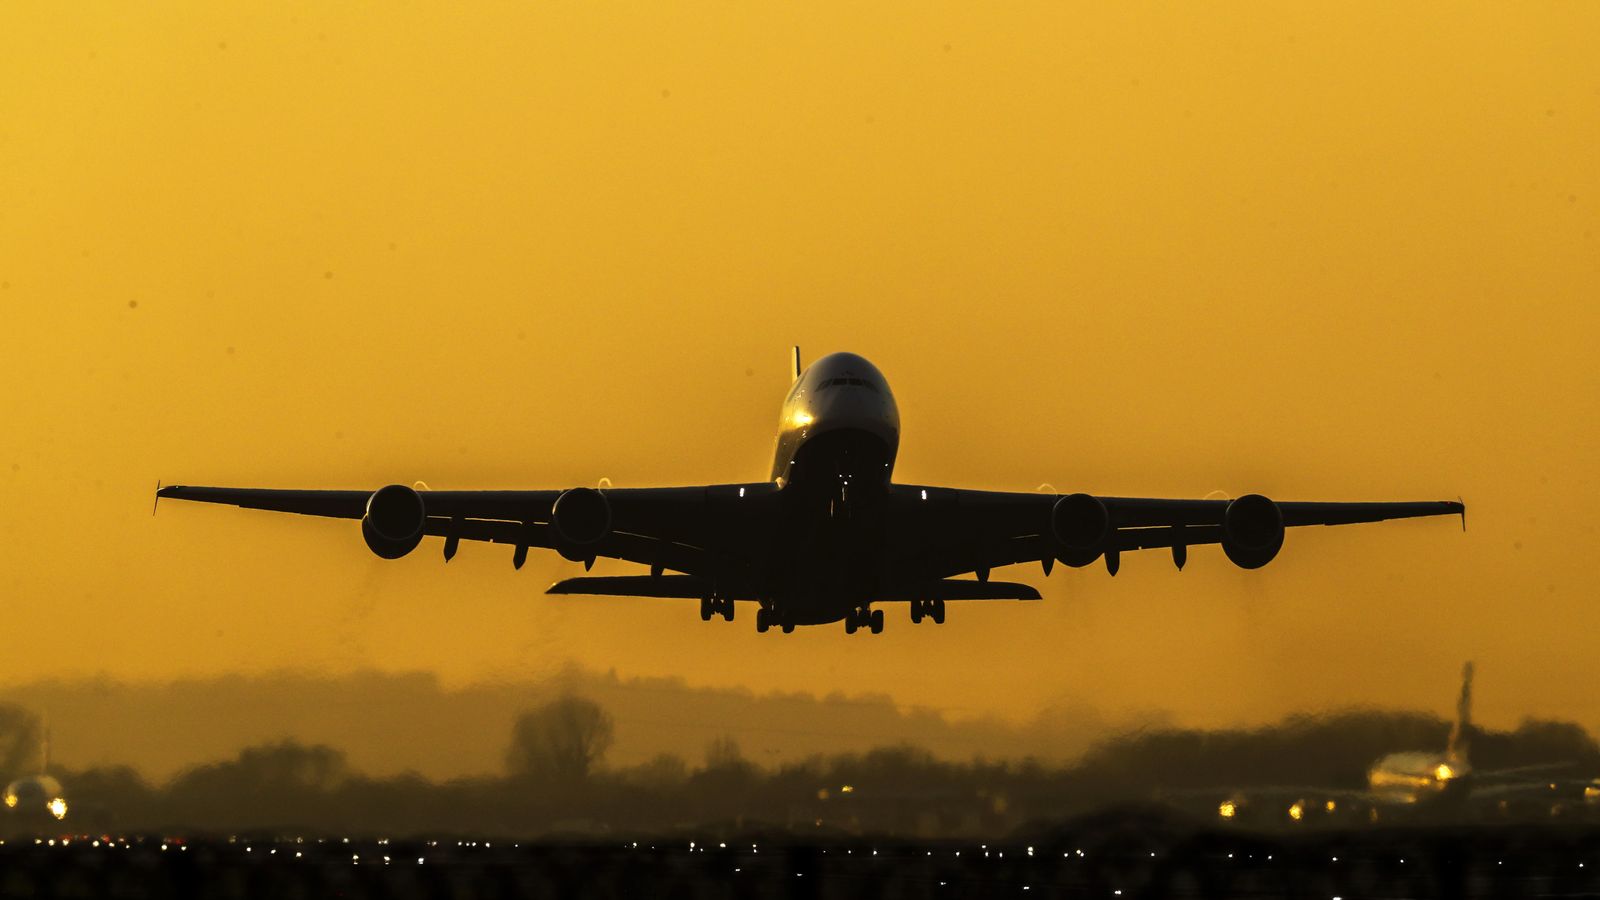 Half-term flights 42% more expensive than before pandemic, analysis shows